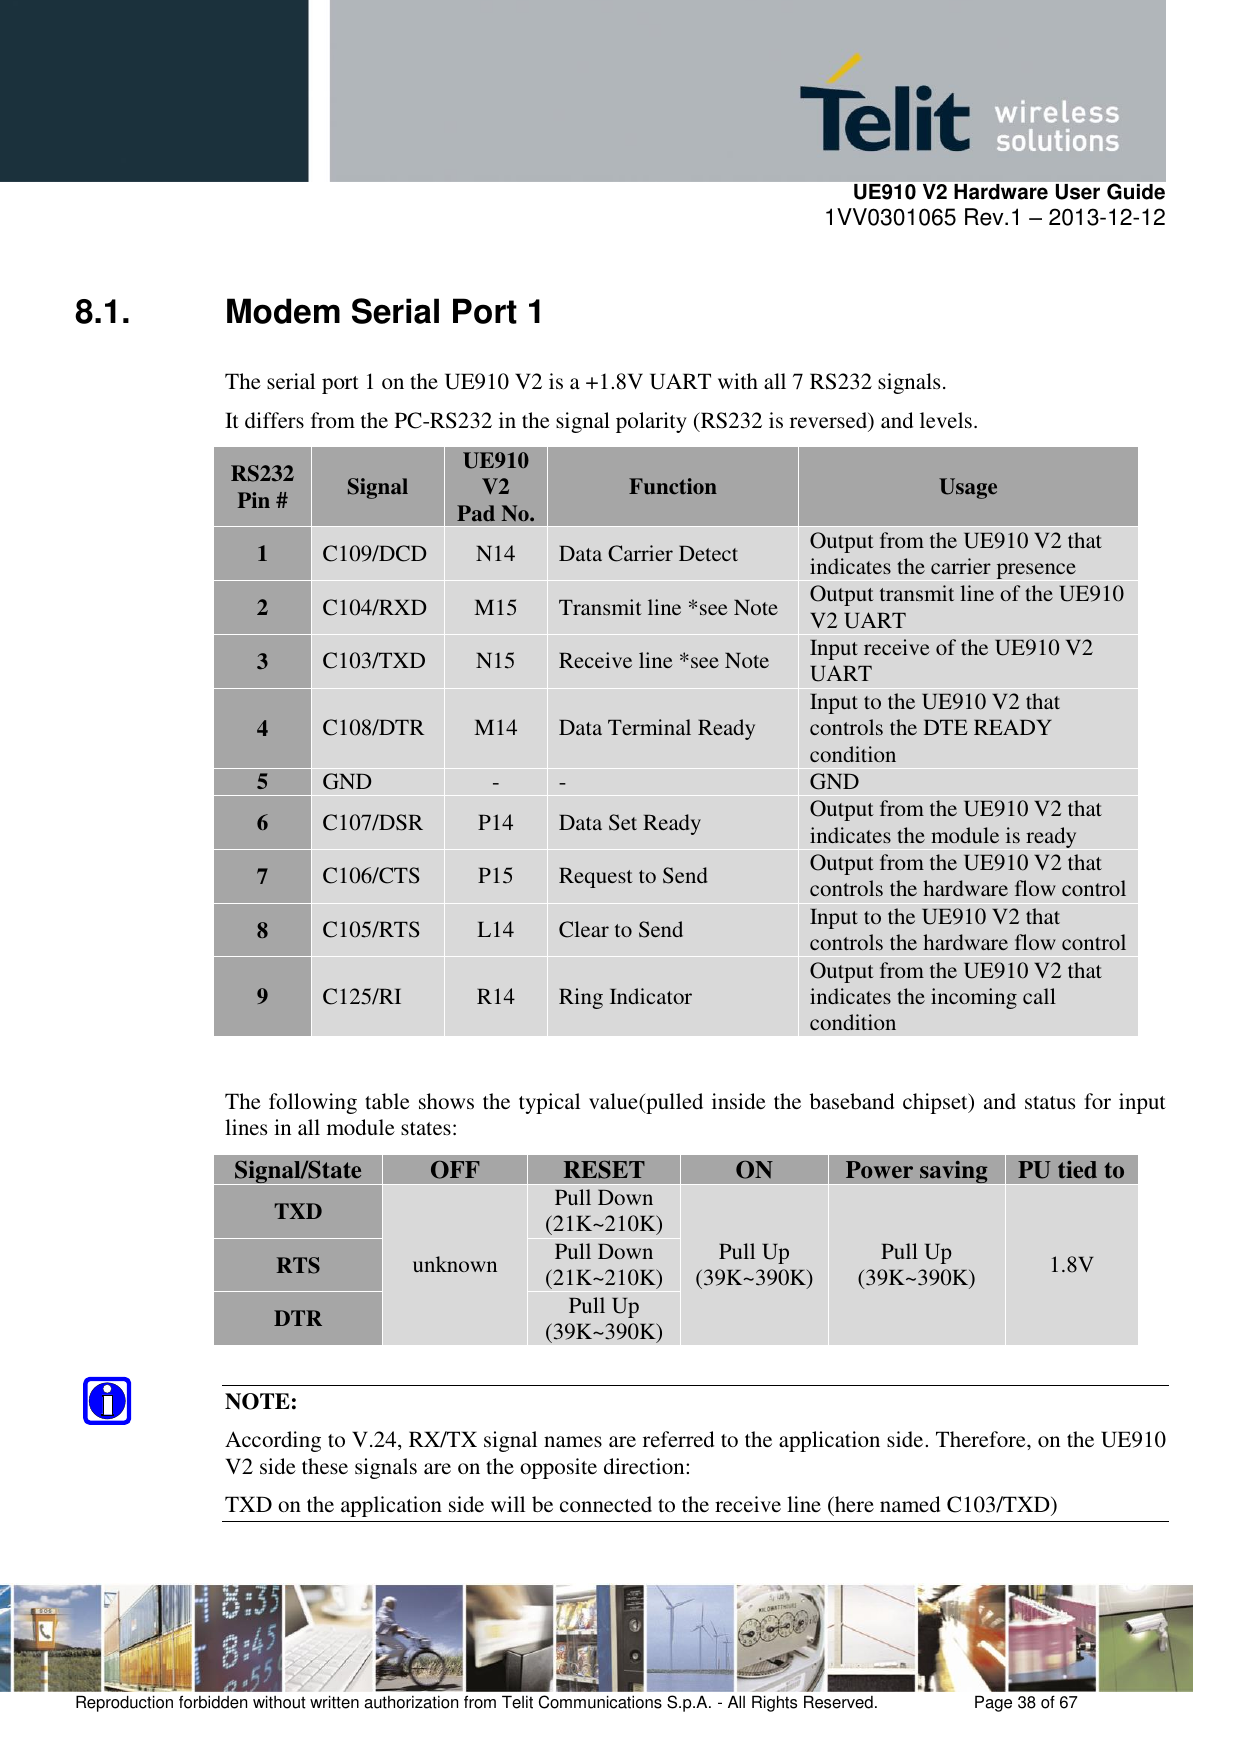     UE910 V2 Hardware User Guide 1VV0301065 Rev.1 – 2013-12-12  Reproduction forbidden without written authorization from Telit Communications S.p.A. - All Rights Reserved.    Page 38 of 67                                                     8.1.  Modem Serial Port 1 The serial port 1 on the UE910 V2 is a +1.8V UART with all 7 RS232 signals.  It differs from the PC-RS232 in the signal polarity (RS232 is reversed) and levels. RS232 Pin # Signal UE910 V2 Pad No. Function Usage 1 C109/DCD N14 Data Carrier Detect Output from the UE910 V2 that indicates the carrier presence 2 C104/RXD M15 Transmit line *see Note Output transmit line of the UE910 V2 UART 3 C103/TXD N15 Receive line *see Note Input receive of the UE910 V2 UART 4 C108/DTR M14 Data Terminal Ready Input to the UE910 V2 that controls the DTE READY condition 5 GND - - GND 6 C107/DSR P14 Data Set Ready Output from the UE910 V2 that indicates the module is ready 7 C106/CTS P15 Request to Send Output from the UE910 V2 that controls the hardware flow control 8 C105/RTS L14 Clear to Send Input to the UE910 V2 that controls the hardware flow control 9 C125/RI R14 Ring Indicator Output from the UE910 V2 that indicates the incoming call condition  The following table shows the typical value(pulled inside the baseband chipset) and status for input lines in all module states: Signal/State OFF RESET ON Power saving PU tied to TXD unknown Pull Down (21K~210K) Pull Up (39K~390K) Pull Up (39K~390K) 1.8V RTS Pull Down (21K~210K) DTR Pull Up (39K~390K)  NOTE: According to V.24, RX/TX signal names are referred to the application side. Therefore, on the UE910 V2 side these signals are on the opposite direction: TXD on the application side will be connected to the receive line (here named C103/TXD) 